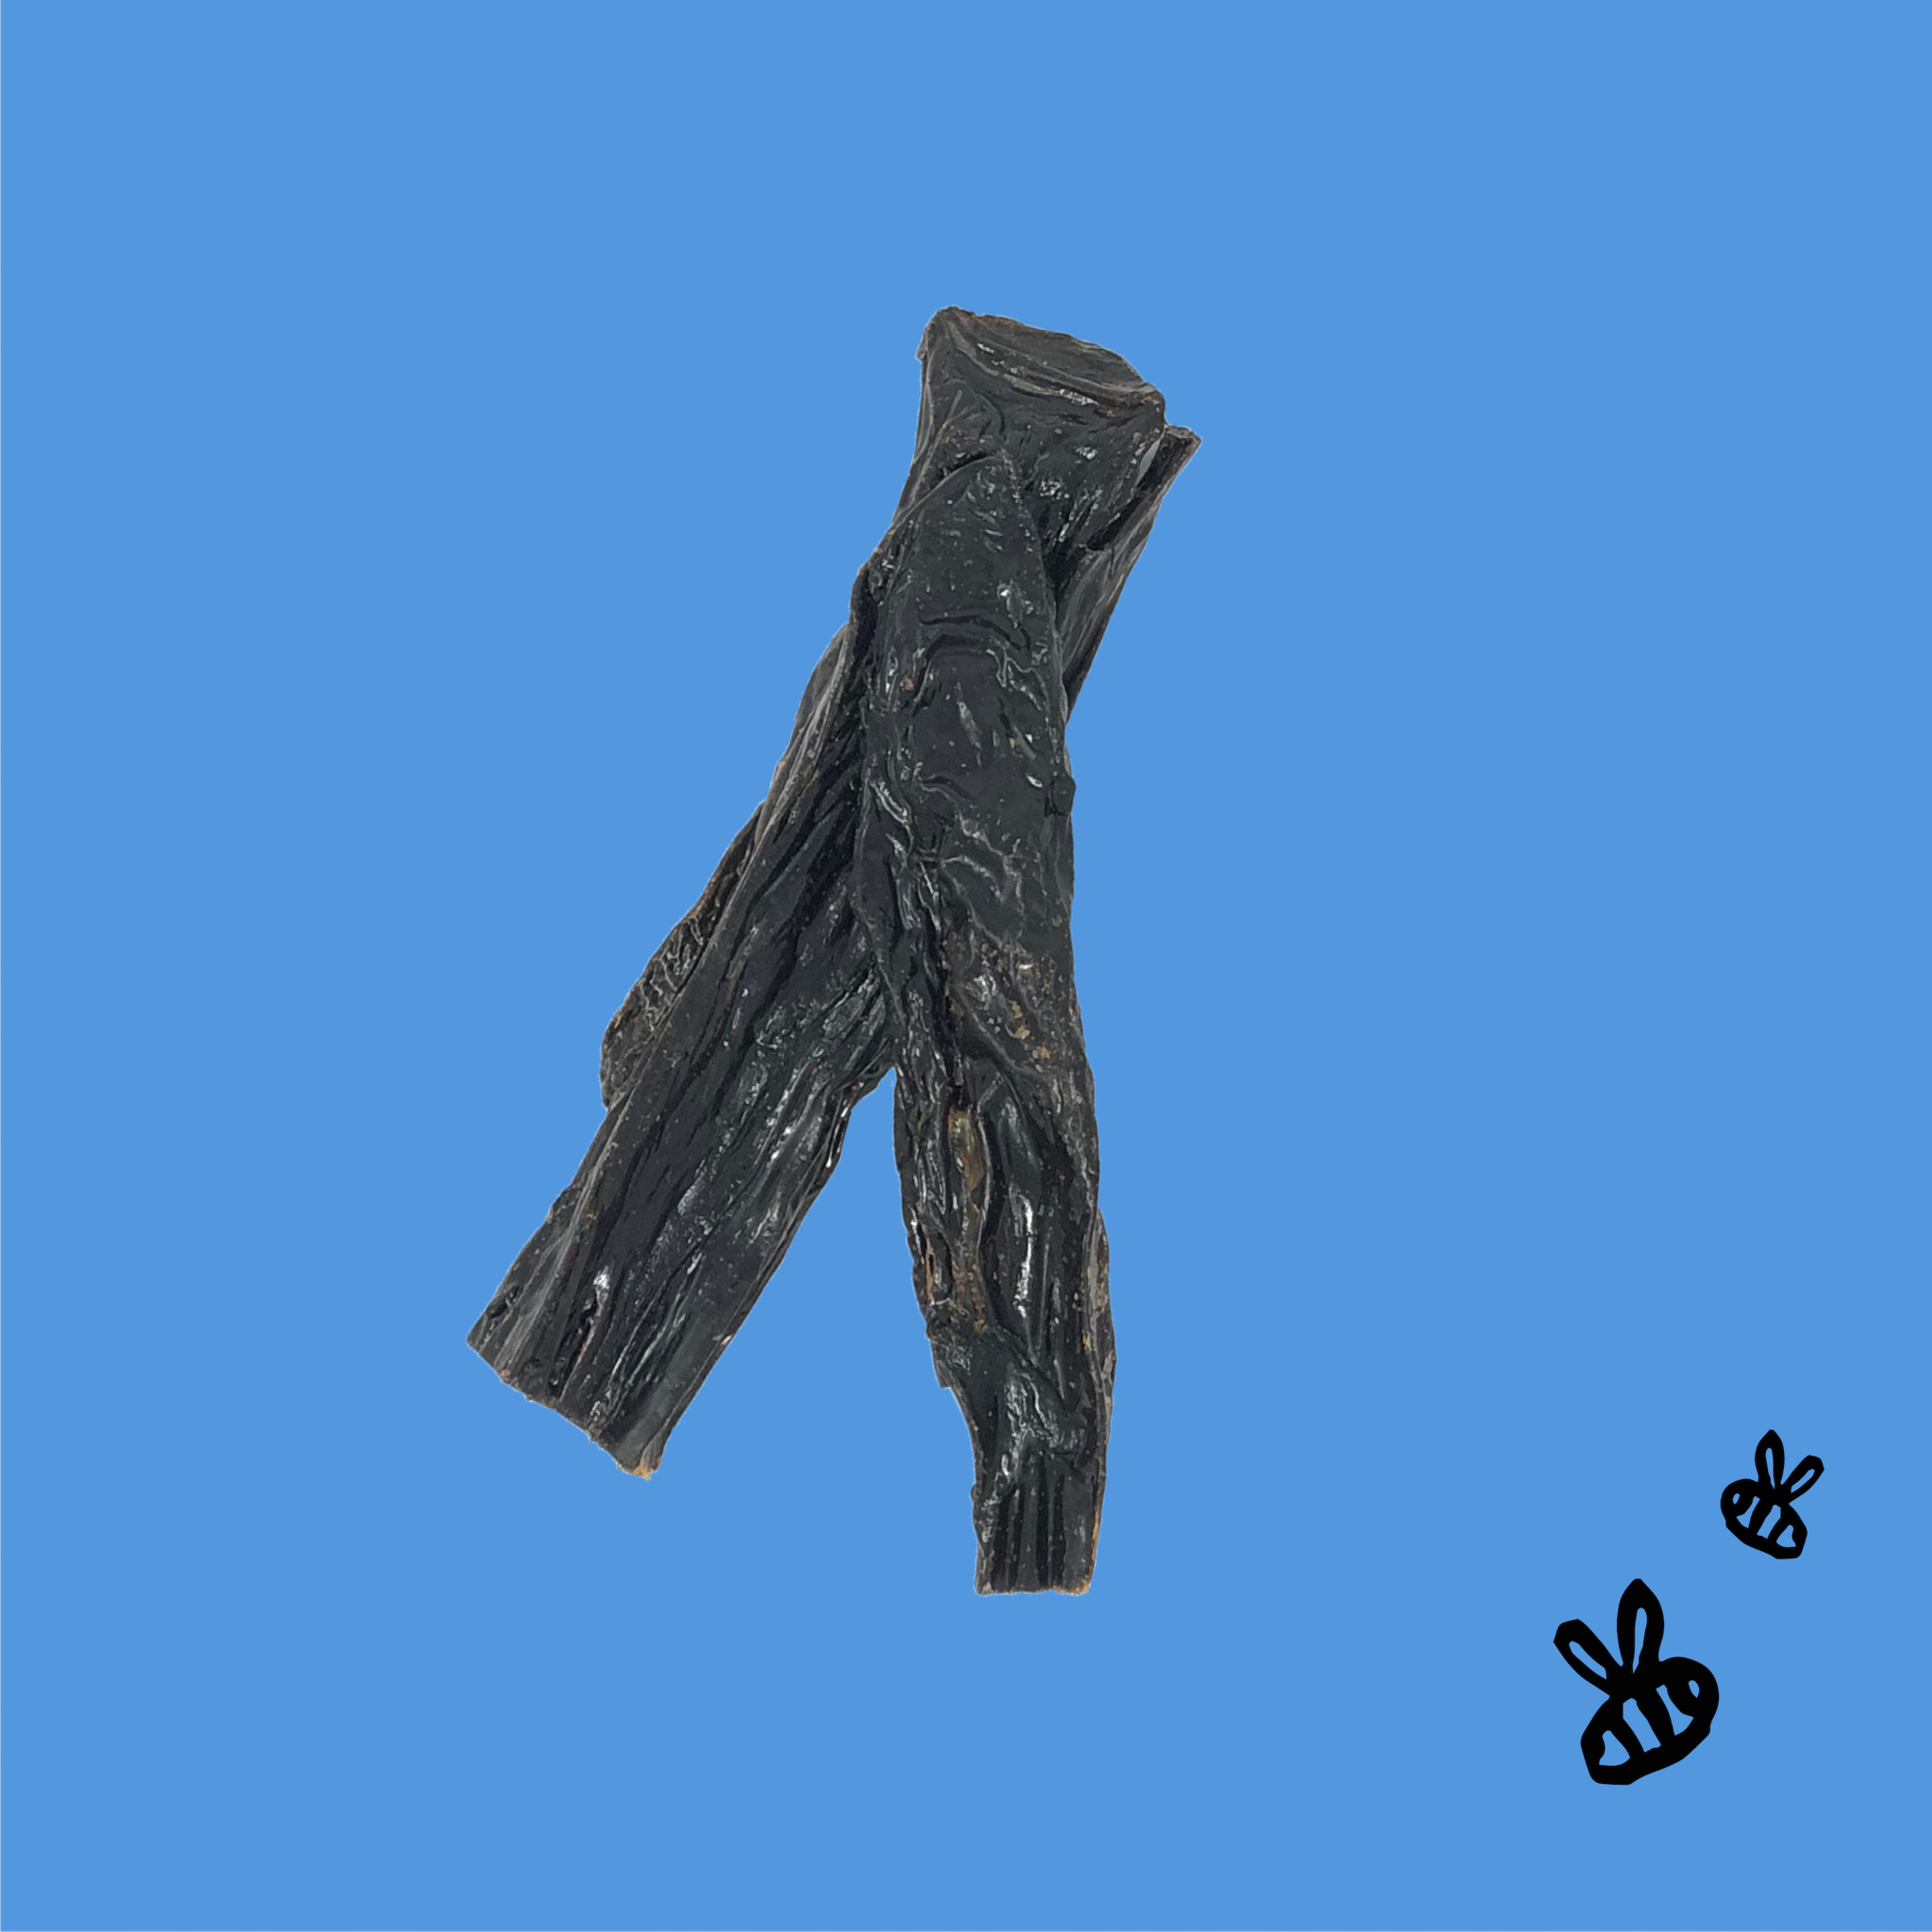 two buffalo liver sticks on a bright blue background. 2 black bees in bottom right corner